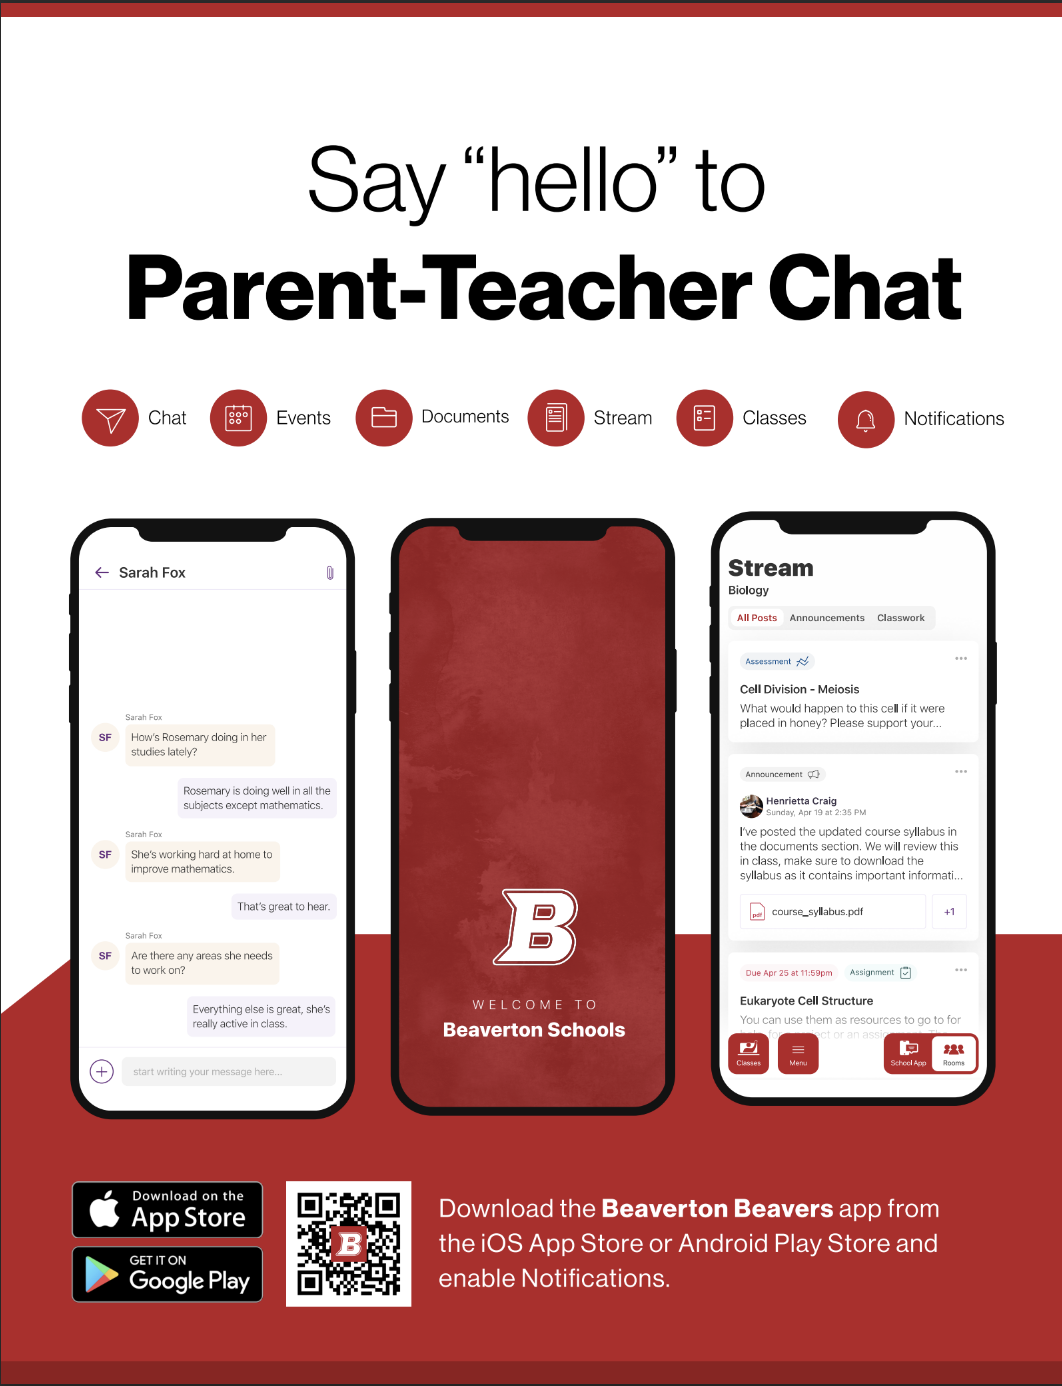 Say hello to Parent-Teacher chat in the new Rooms app. Download the Beaverton Schools app in the Google Play or Apple App store